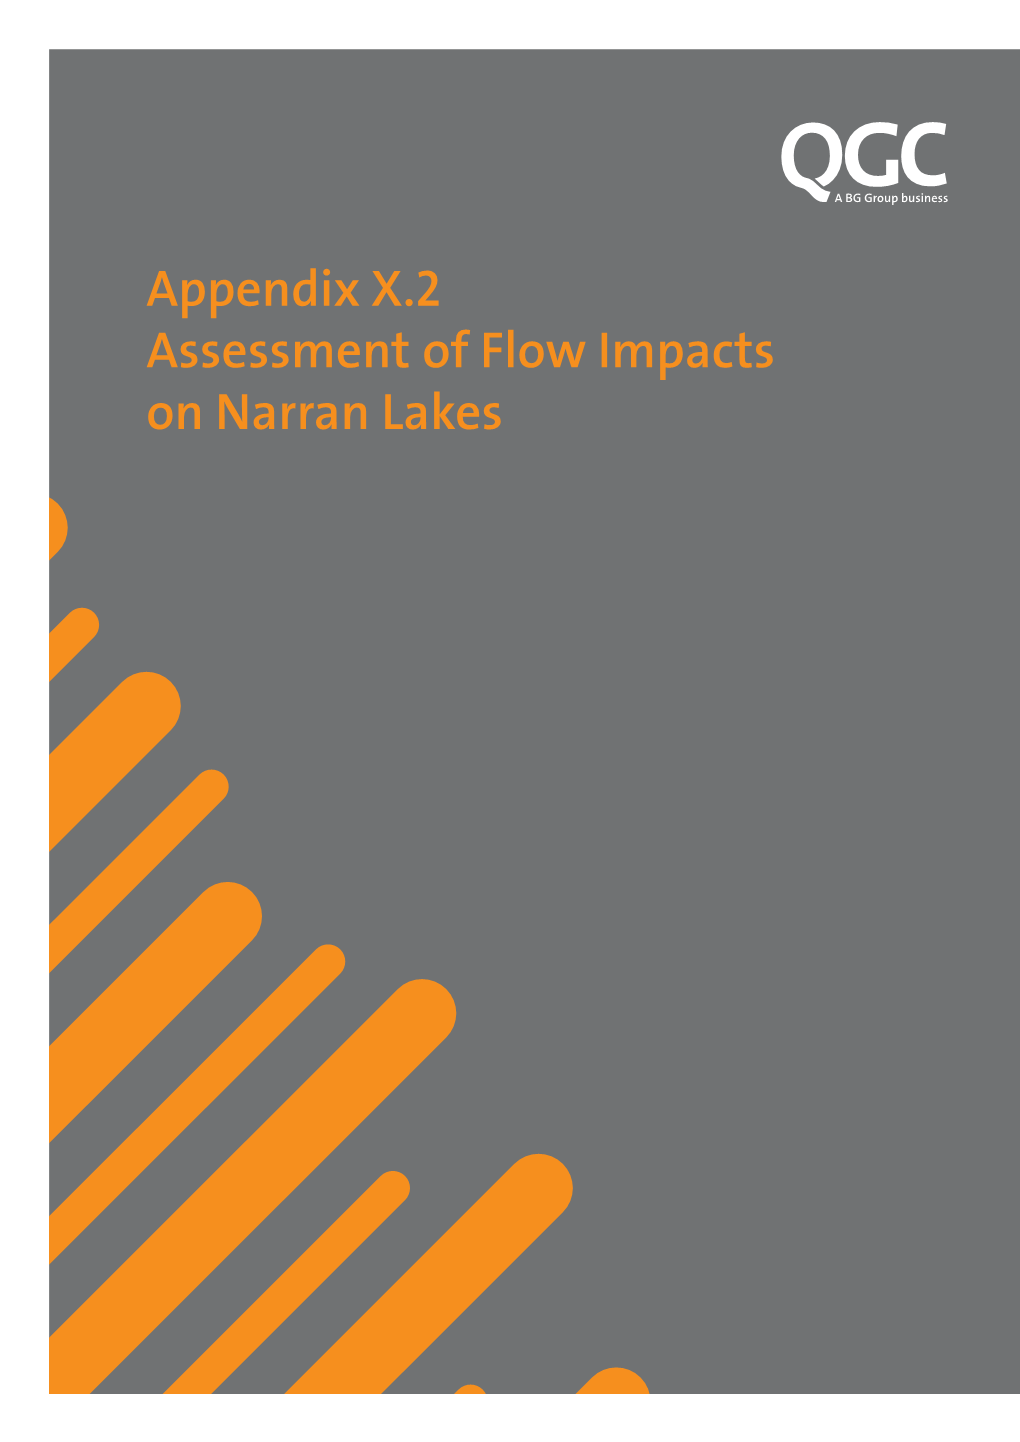 Appendix X.2 Assessment of Flow Impacts on Narran Lakes